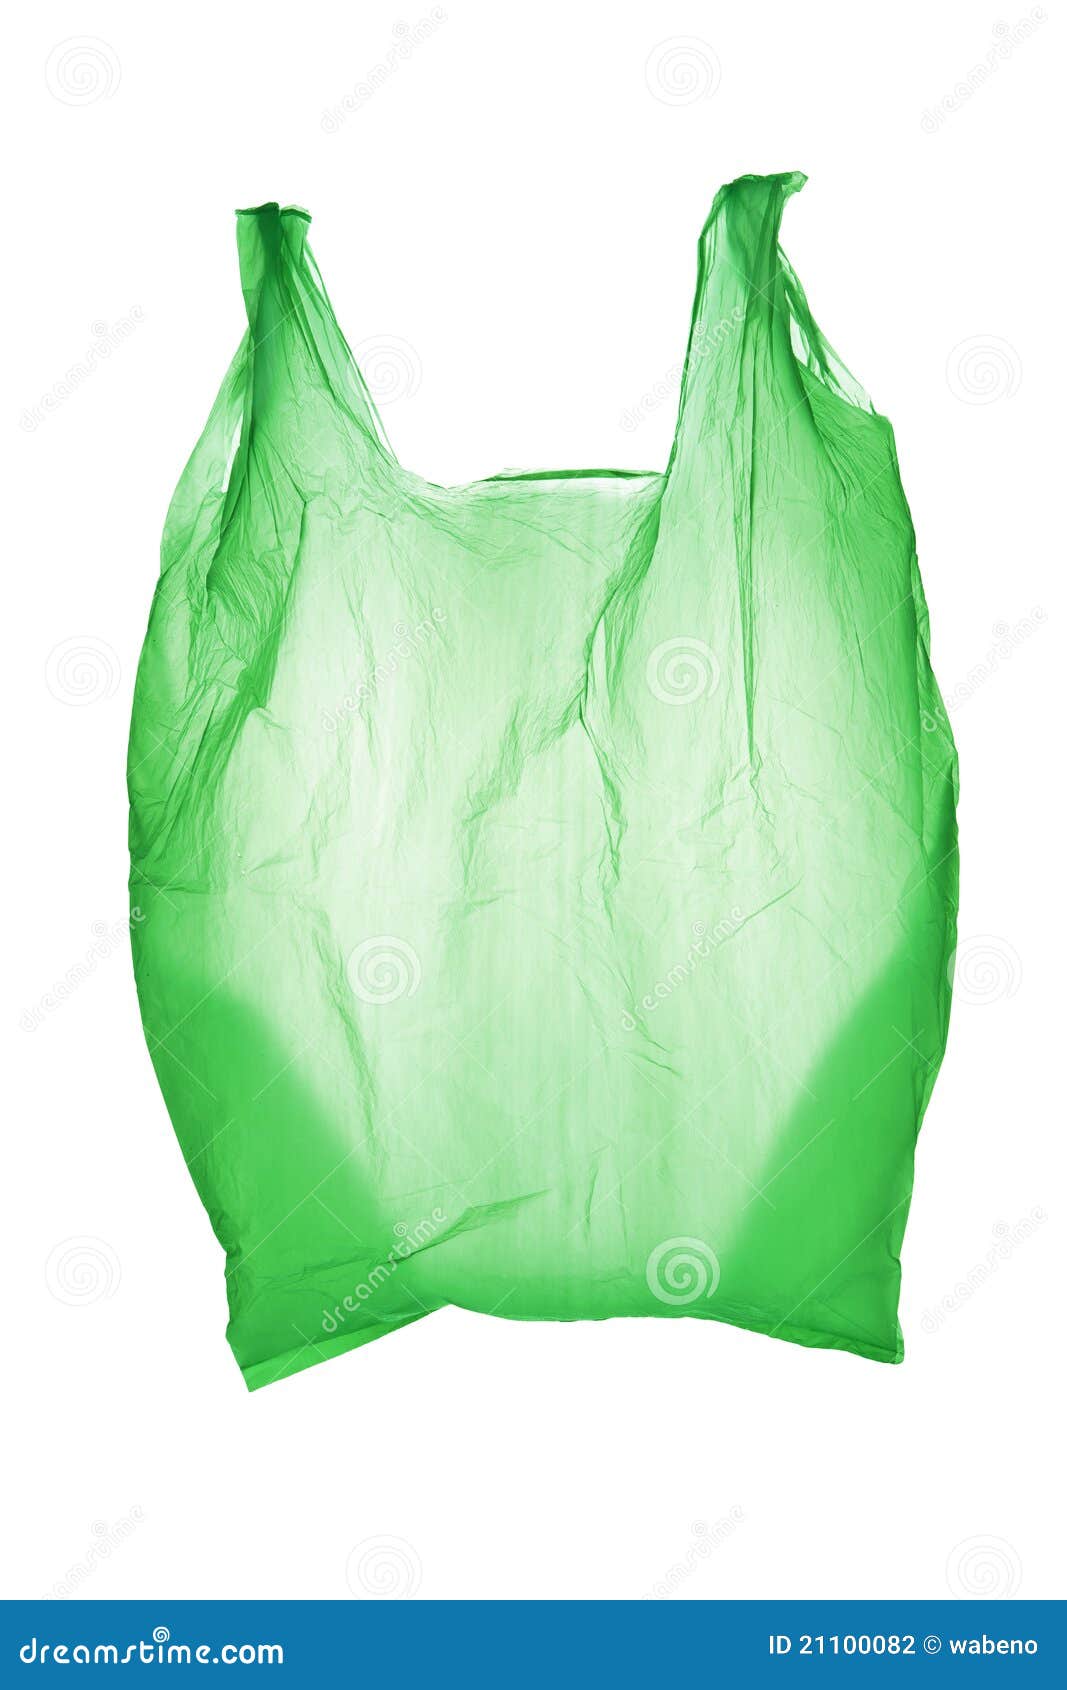 Plastic bag stock photo. Image of pollution, shopping - 21100082